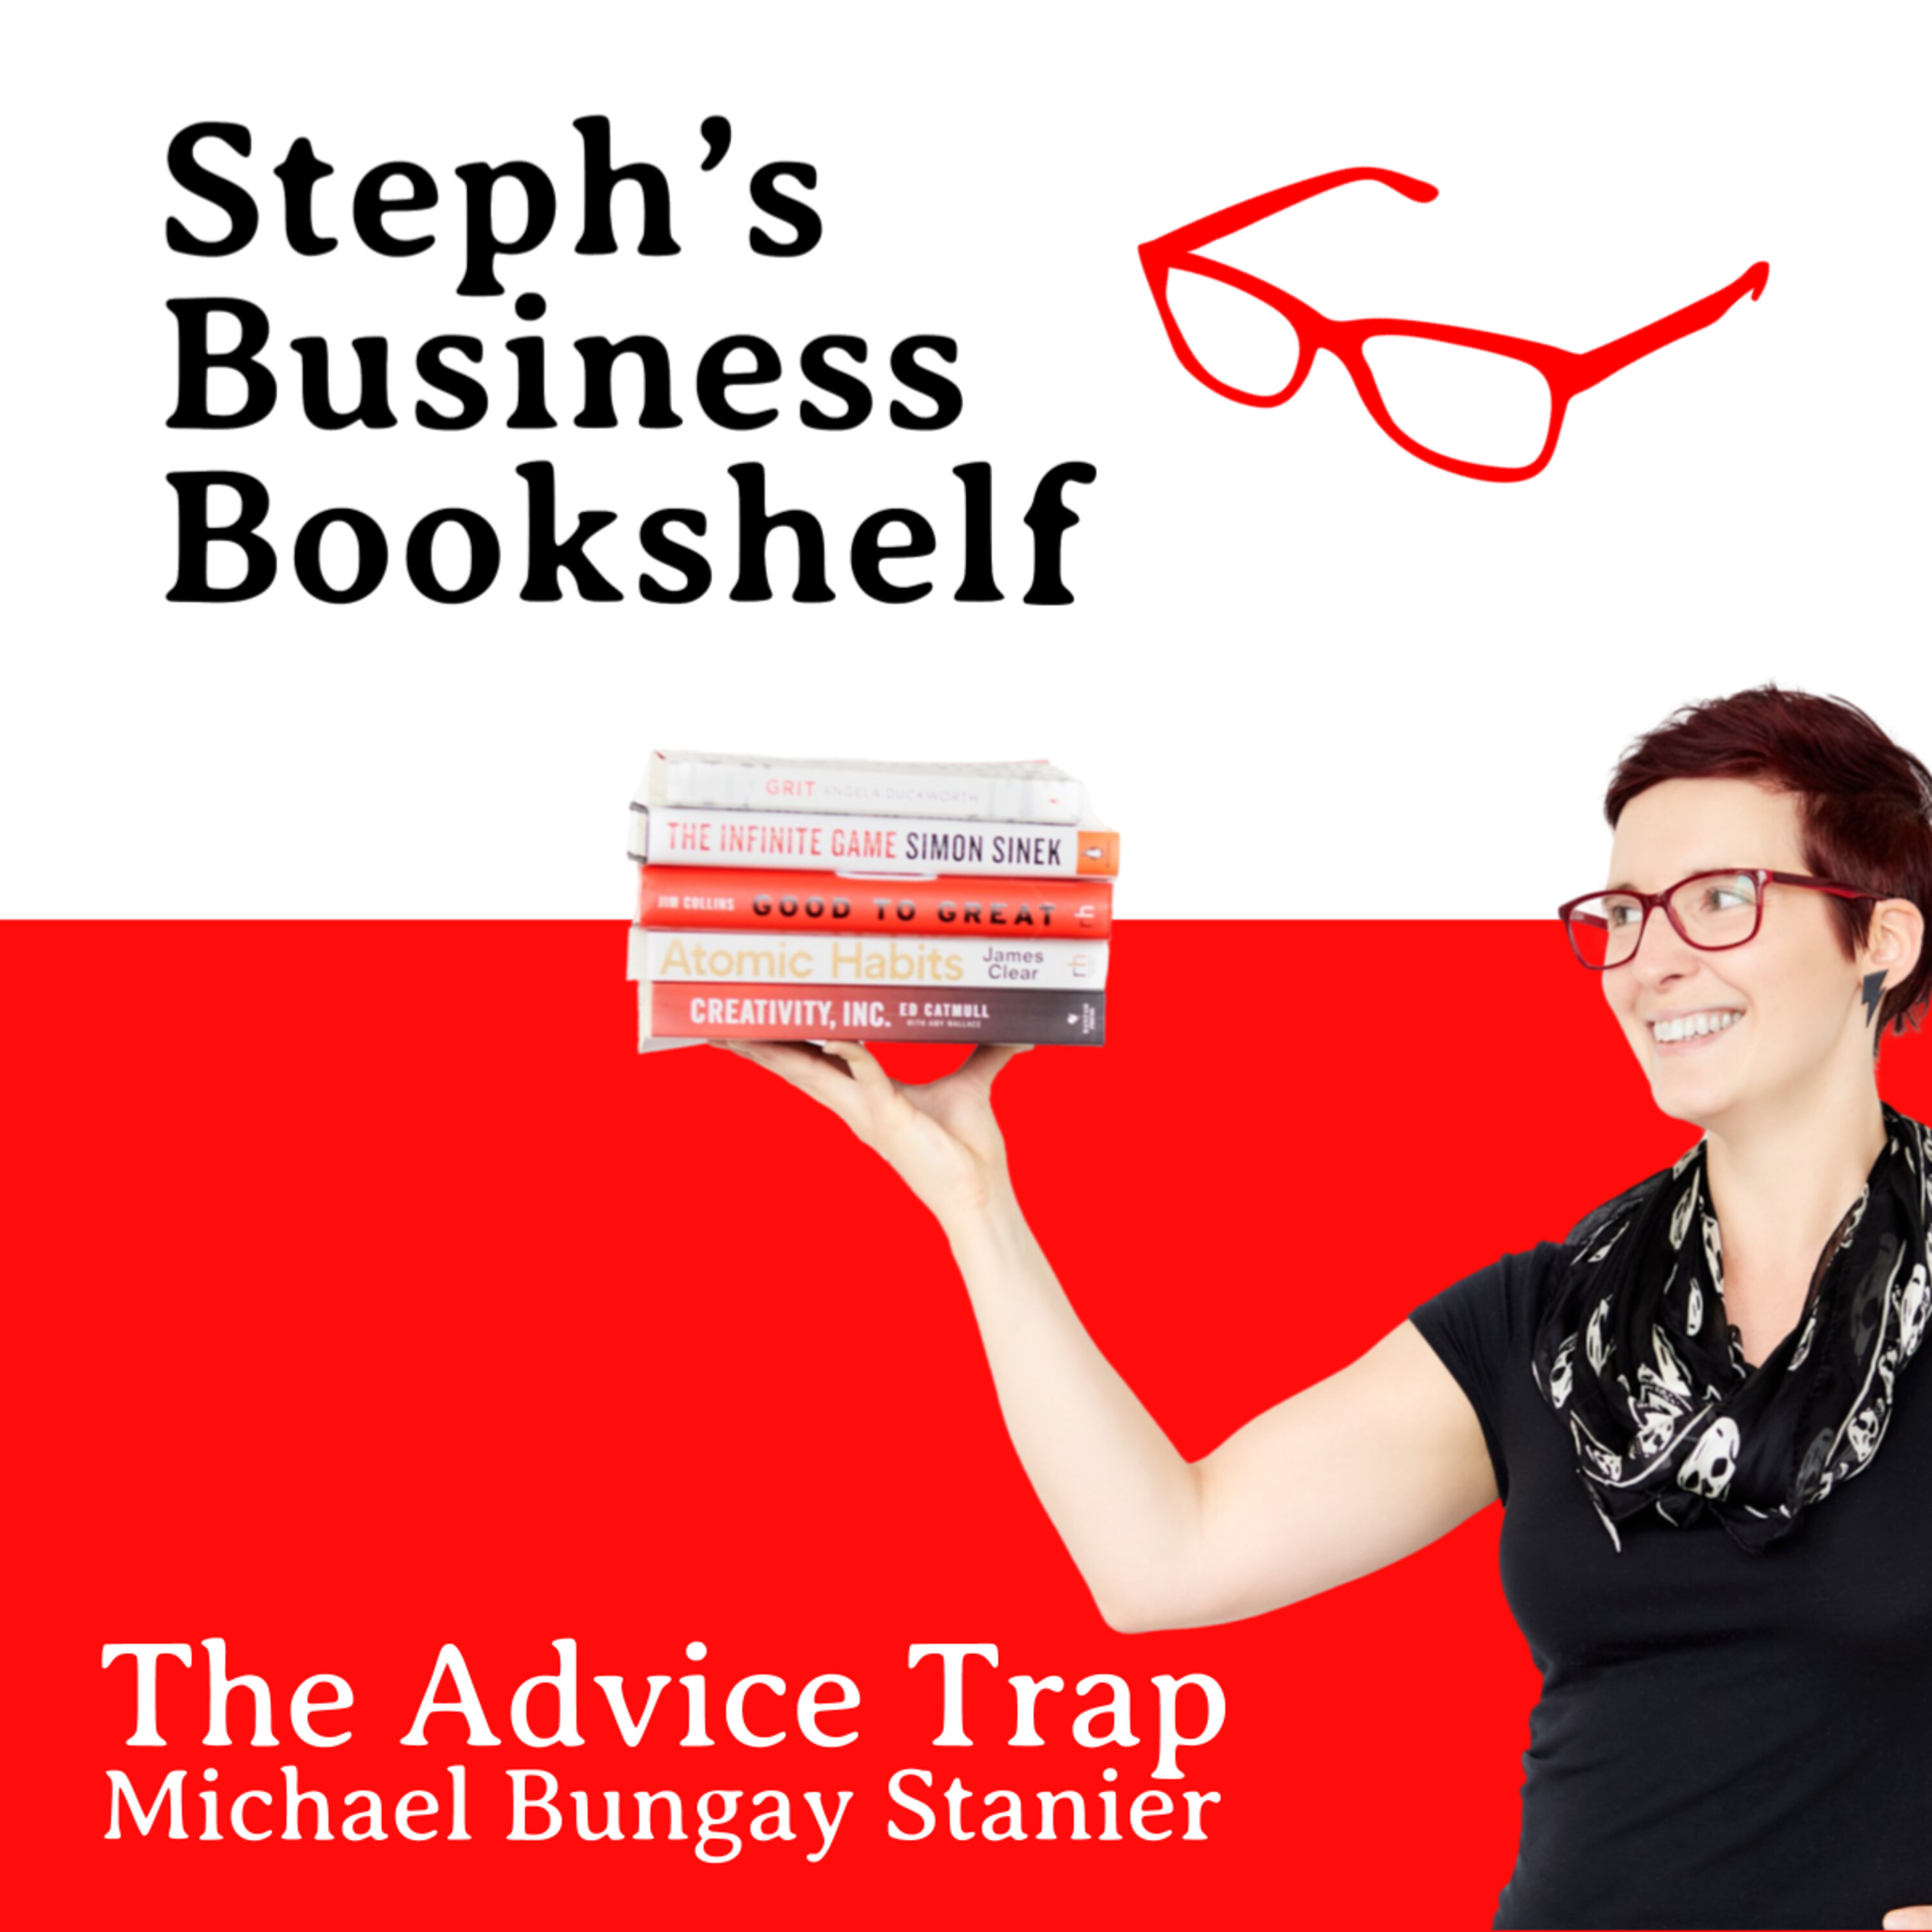 The Advice Trap Michael Bungay Stanier: How to save others from the perils of your good advice